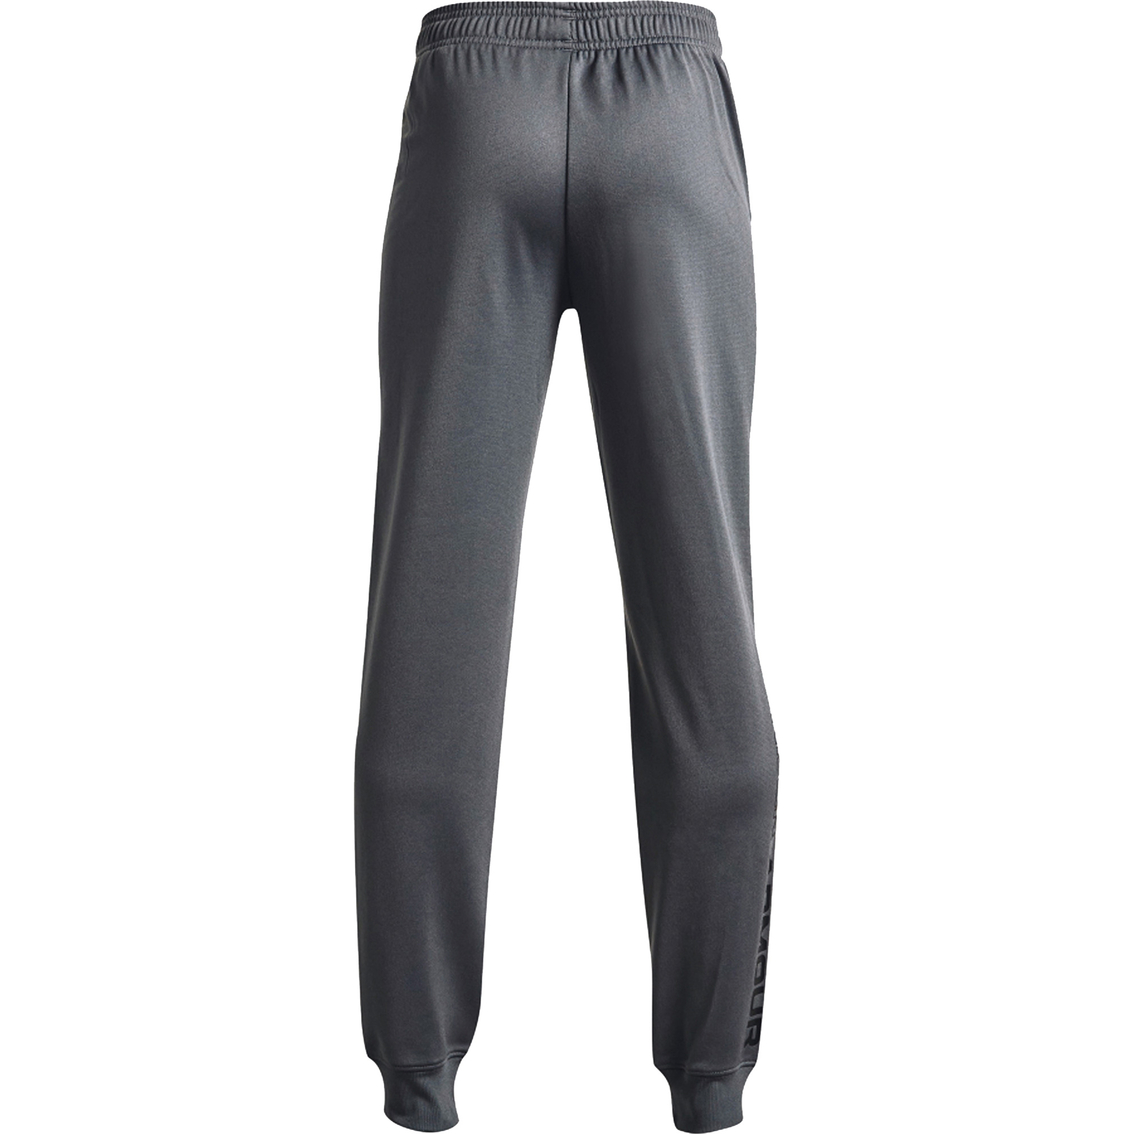 Under Armour Boys Brawler 2.0 Tapered Pants - Image 2 of 2